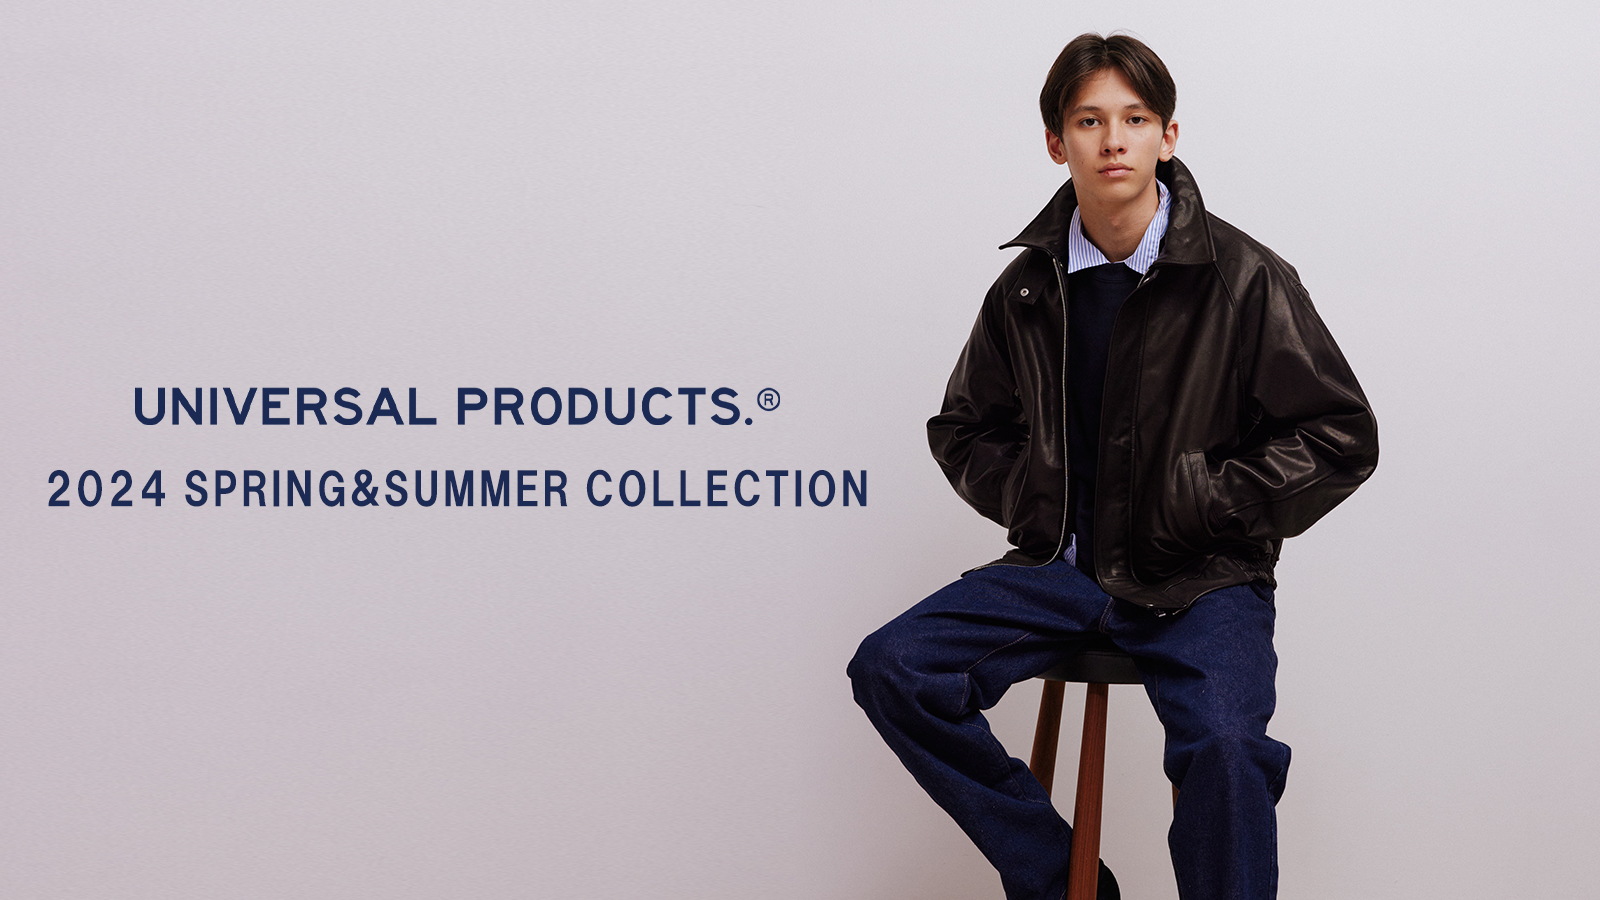 UNIVERSAL PRODUCTS.(ユニバーサルプロダクツ)24SS/春夏 1月入荷予定